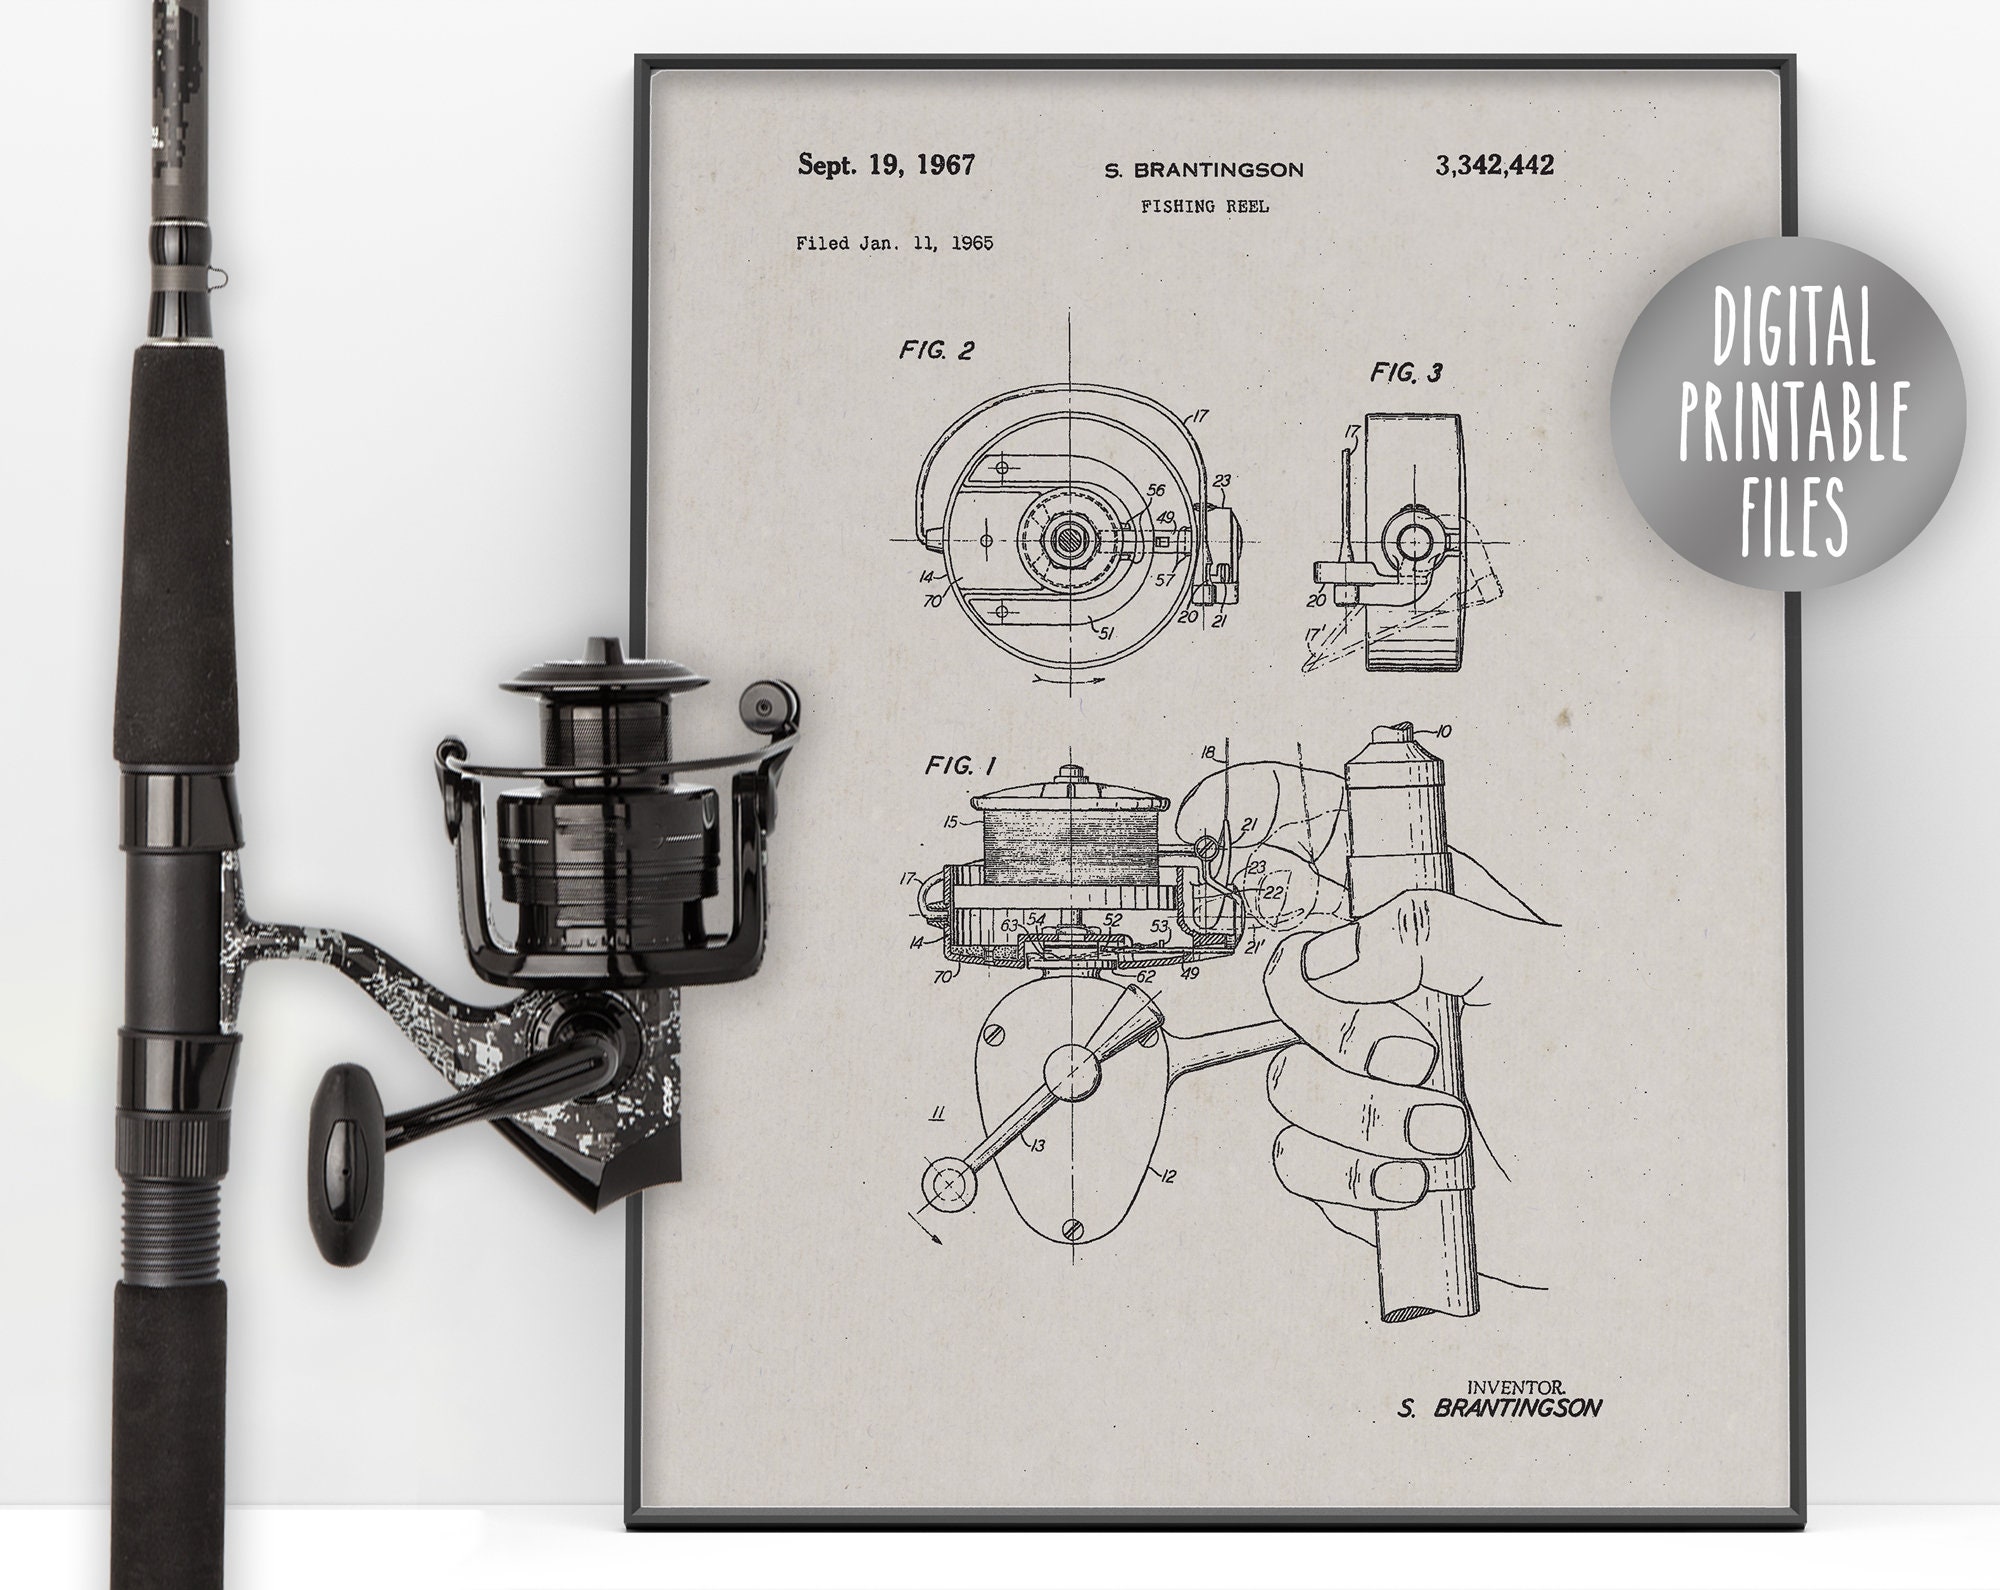 Vintage Fishing Spinning Reel Patent Drawing Poster, Digital Printable Wall  Decor, Instant Download Files, Fishing Rod Custom Print Gift 